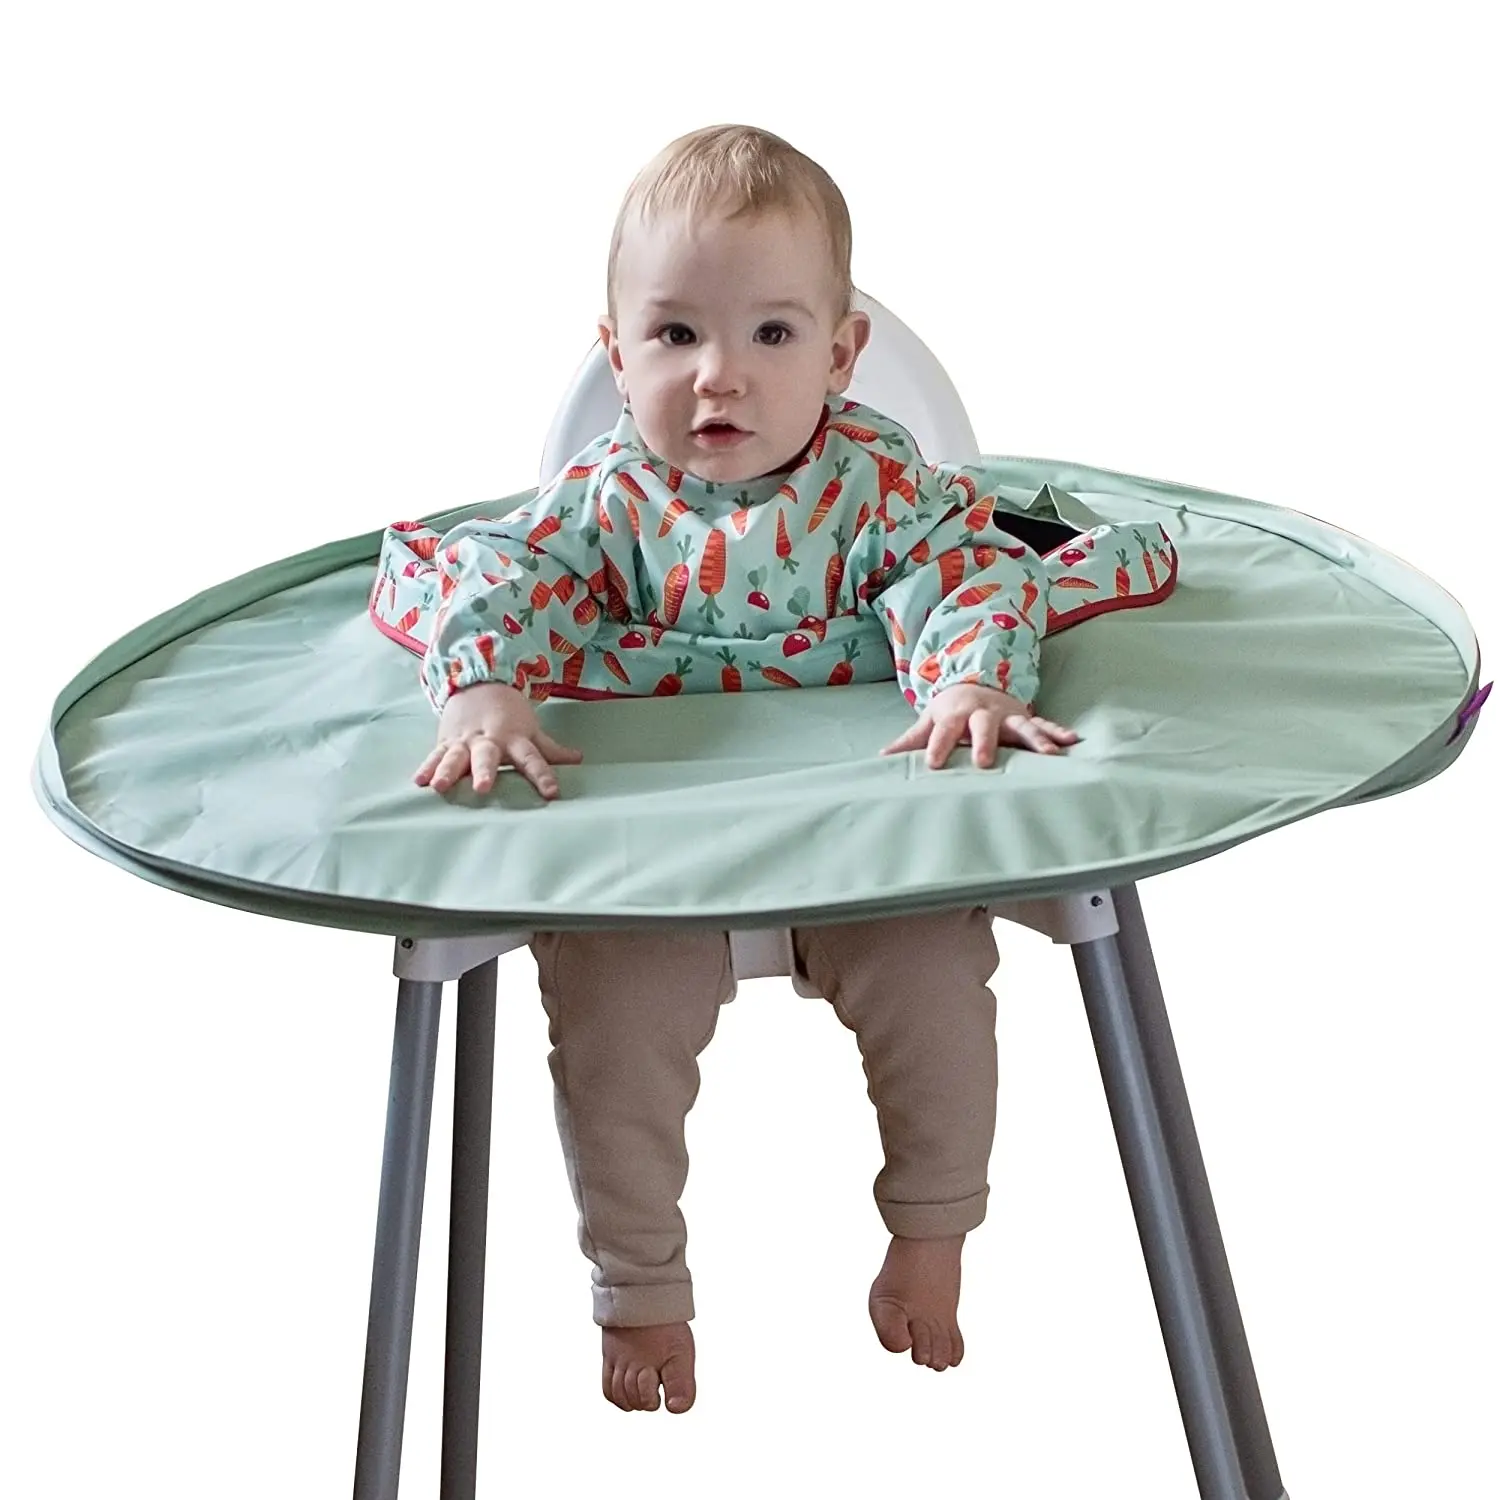 Infant Feeding Table Cover For High Chair Canvas Baby Eat Table Mat Learn To Eat Autonomously Graffiti Painting Mat  baby bib